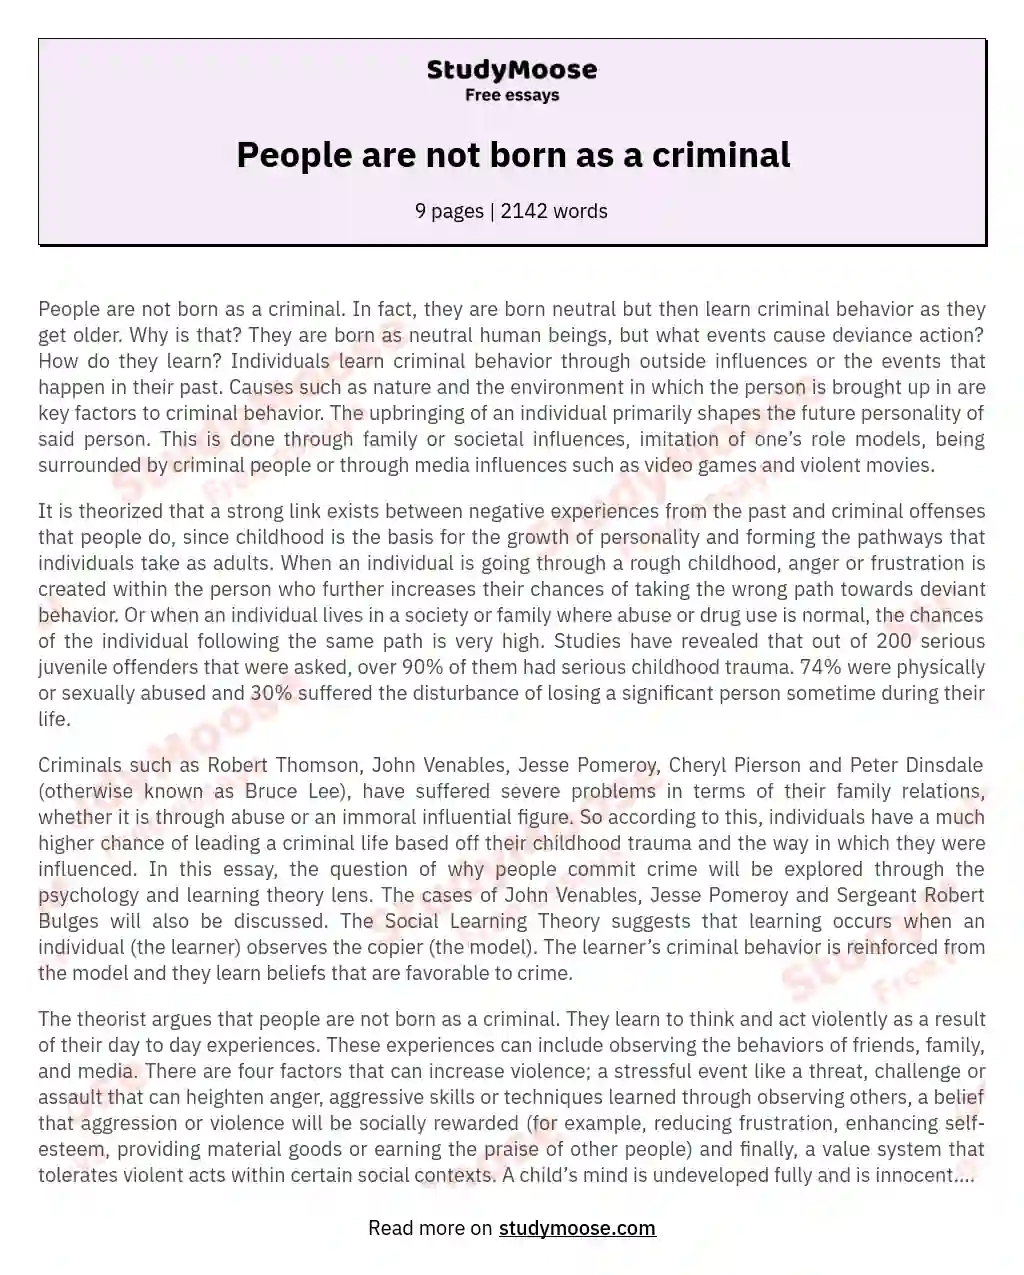 People are not born as a criminal essay